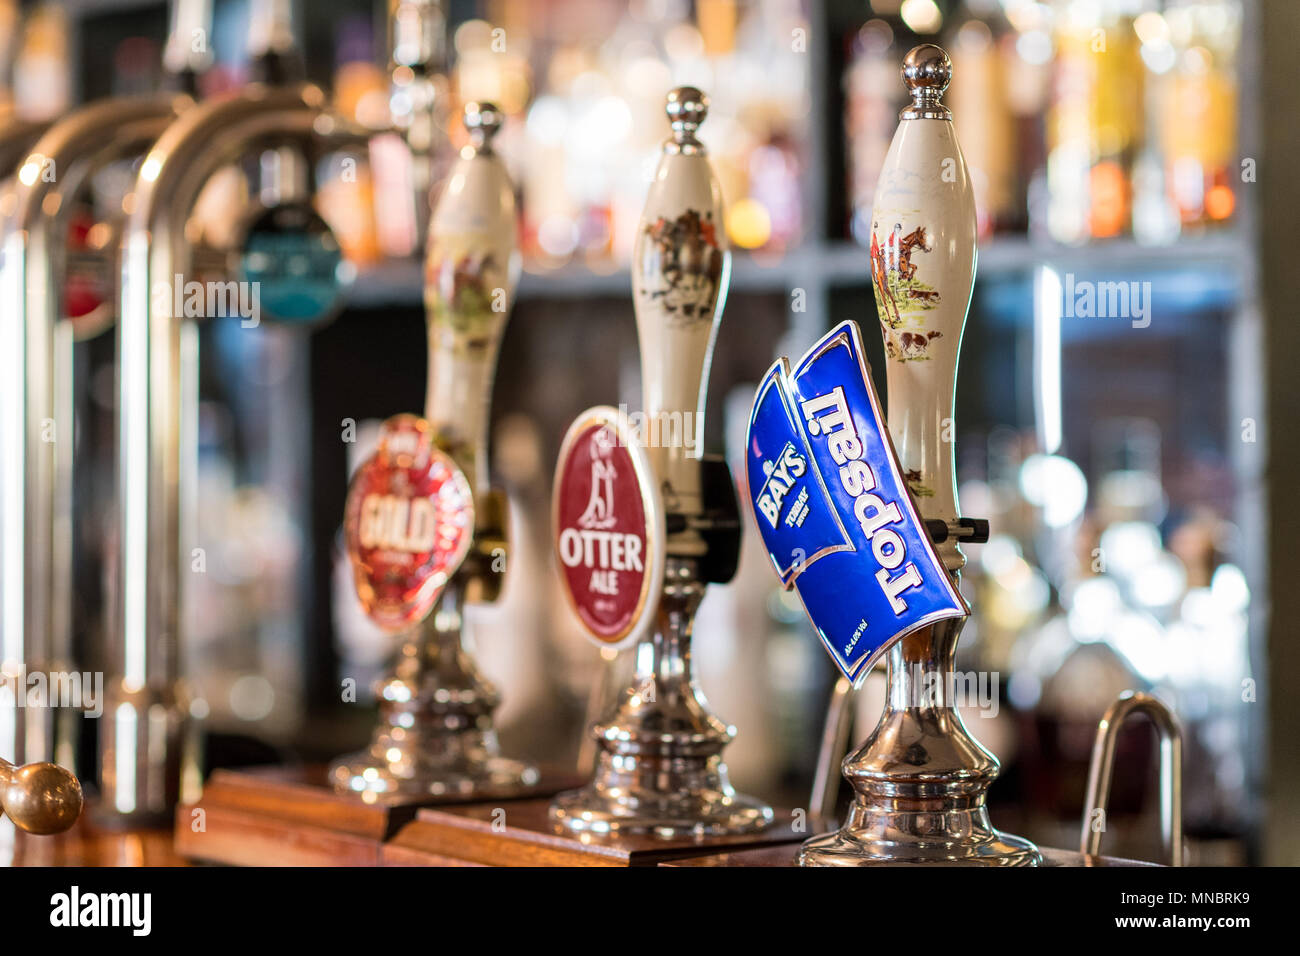 A traditional English pub bar with cask pumps Stock Photo